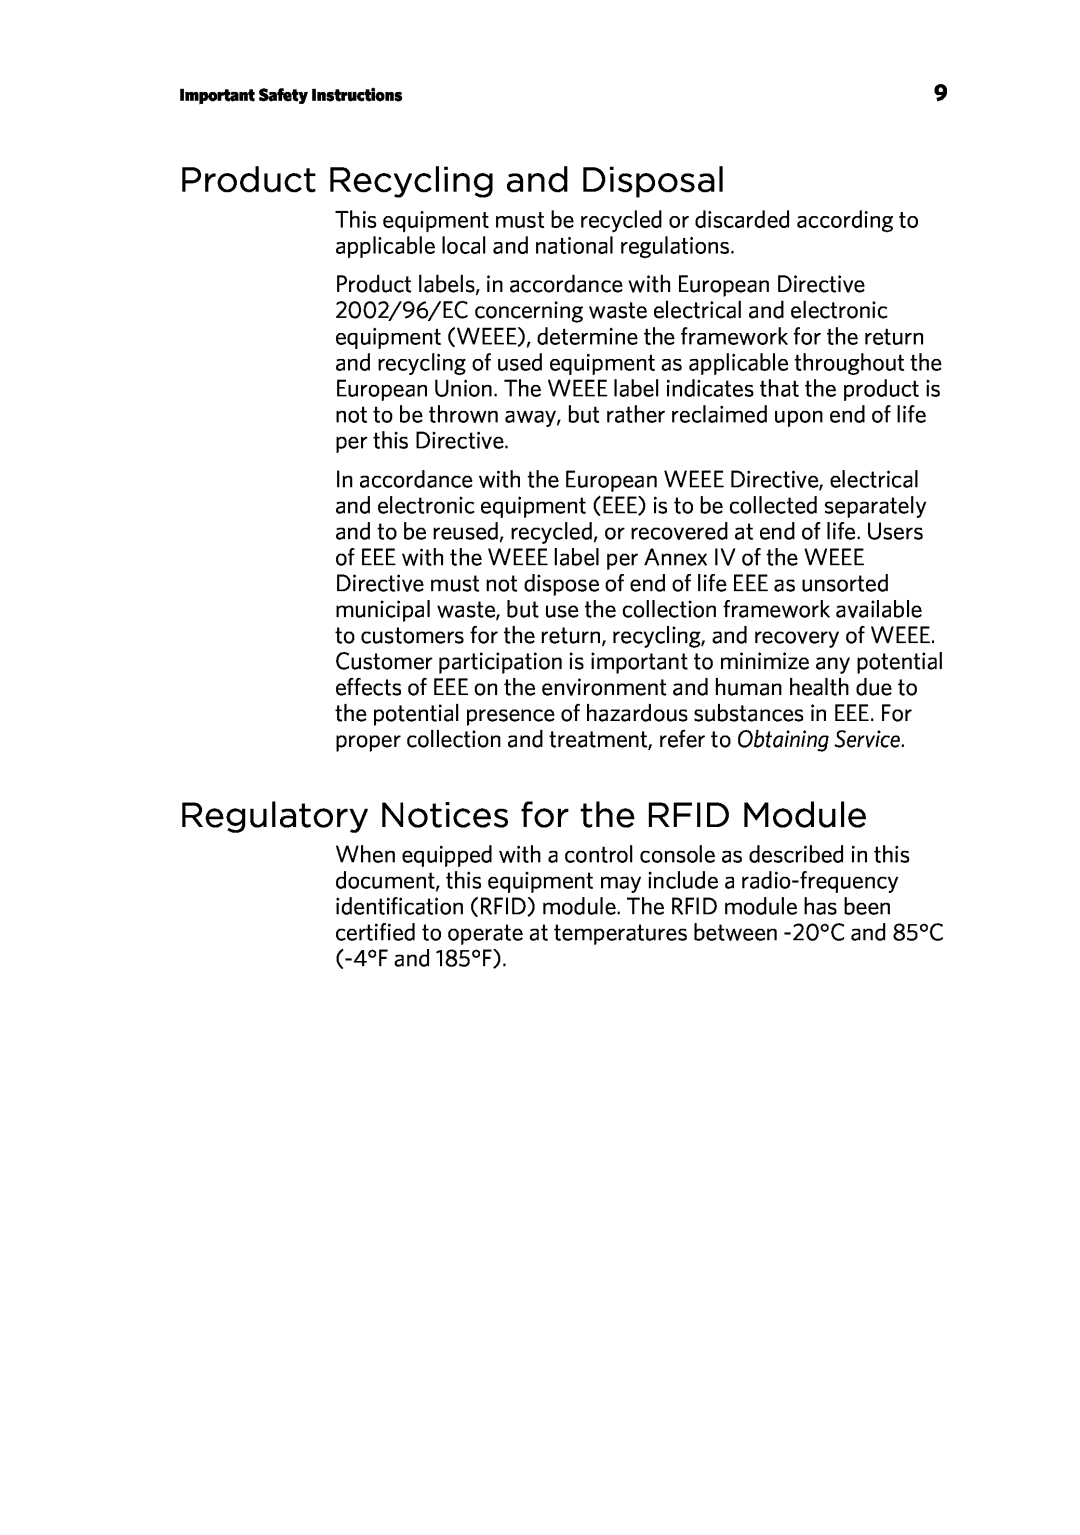 Precor P80 manual Product Recycling and Disposal, Regulatory Notices for the RFID Module, Important Safety Instructions 